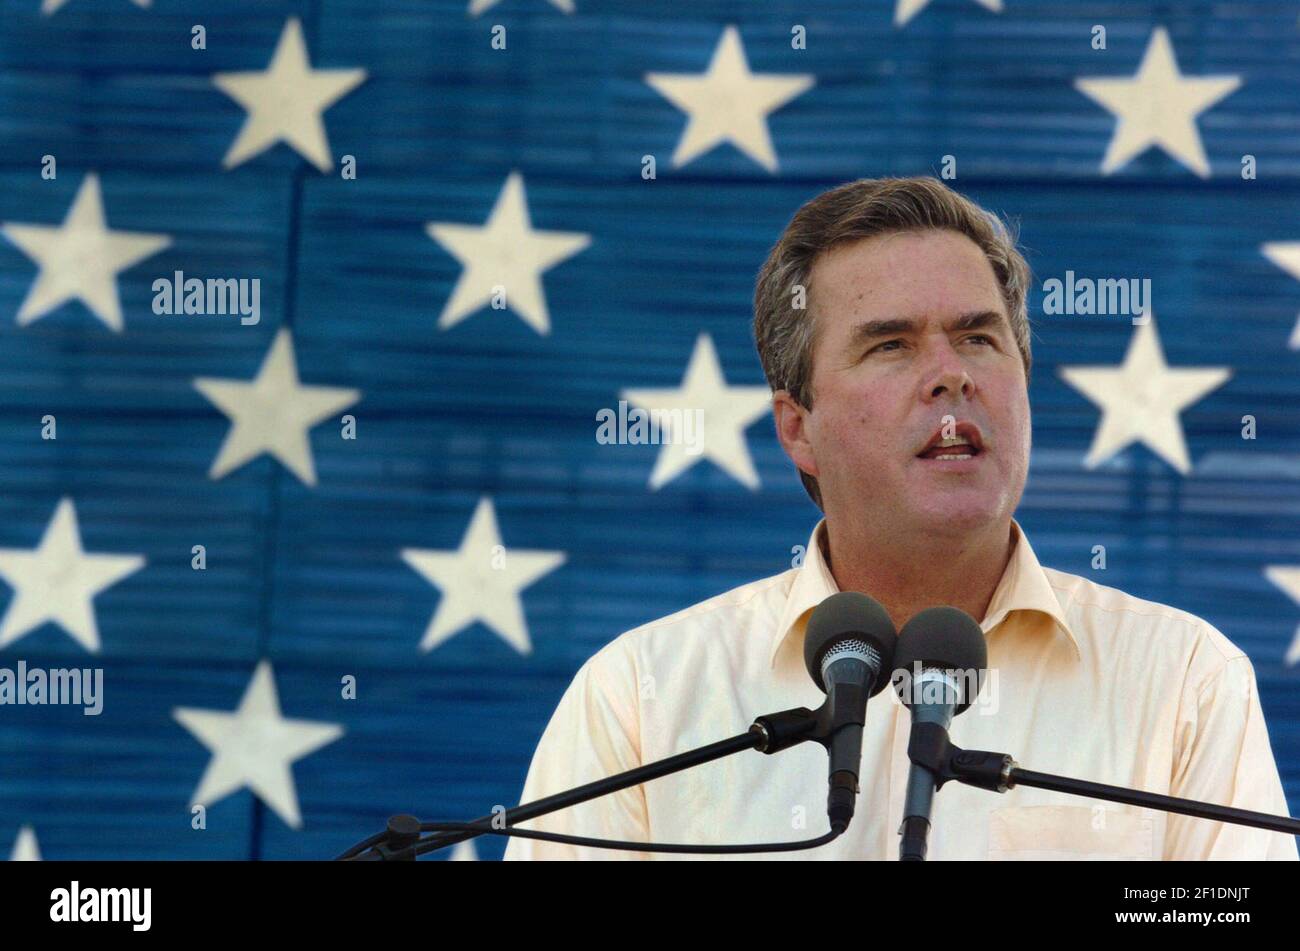 Governor Jeb Bush addresses the crowd at 'A Salute to Florida's Heroes', a welcome-home celebration for Florida military men and women back from Iraq and Afghanistan held on July 10, 2004 at Bayfront Park in Miami, Fla. (Photo by Donna E. Natale Planas/Miami Herald/TNS) *** Please Use Credit from Credit Field *** Stock Photo